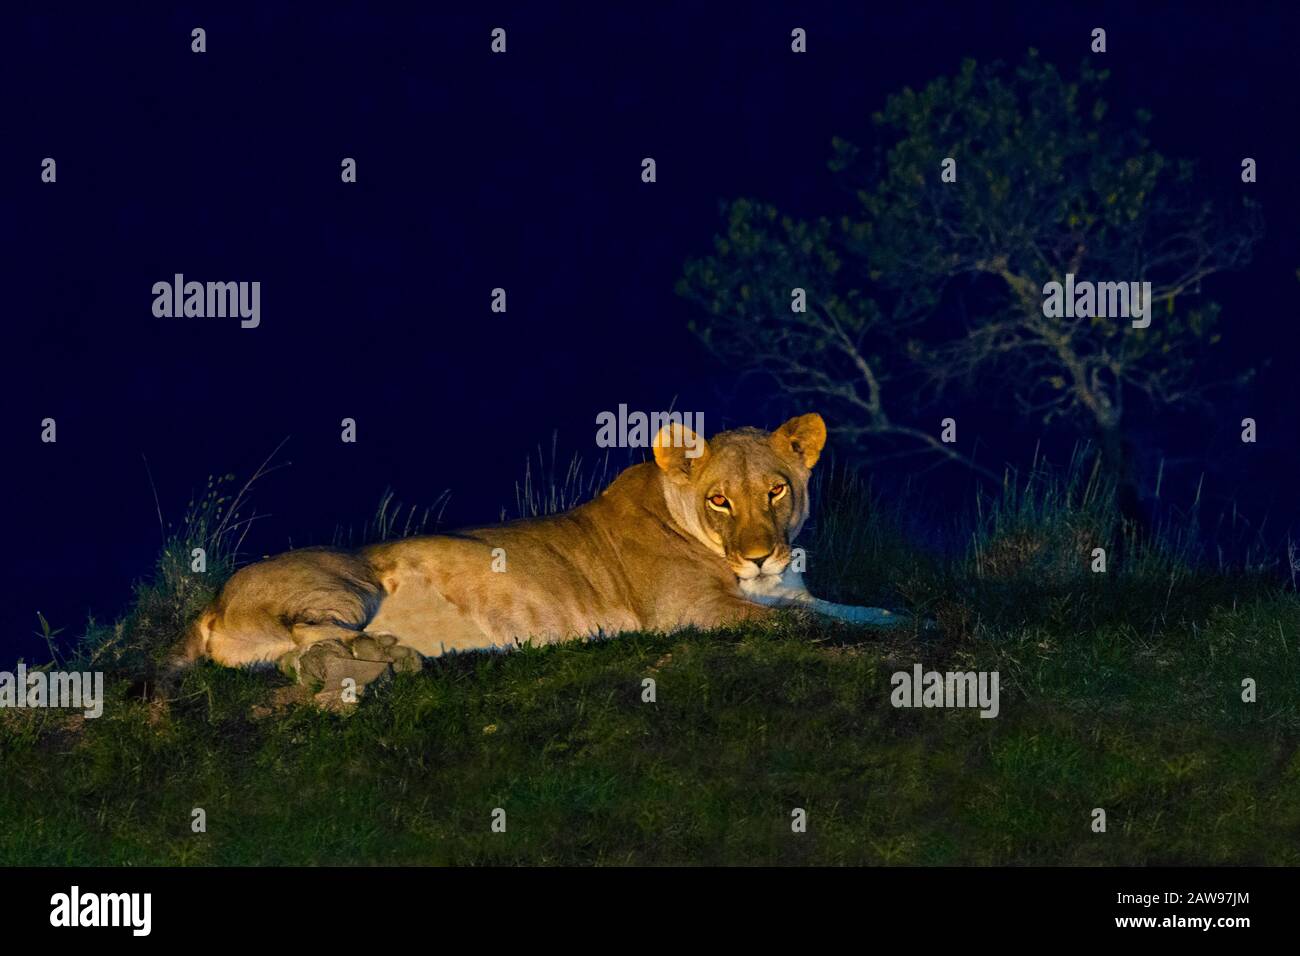 Lioness at night, in Sweetwaters, Kenya, Africa Stock Photo